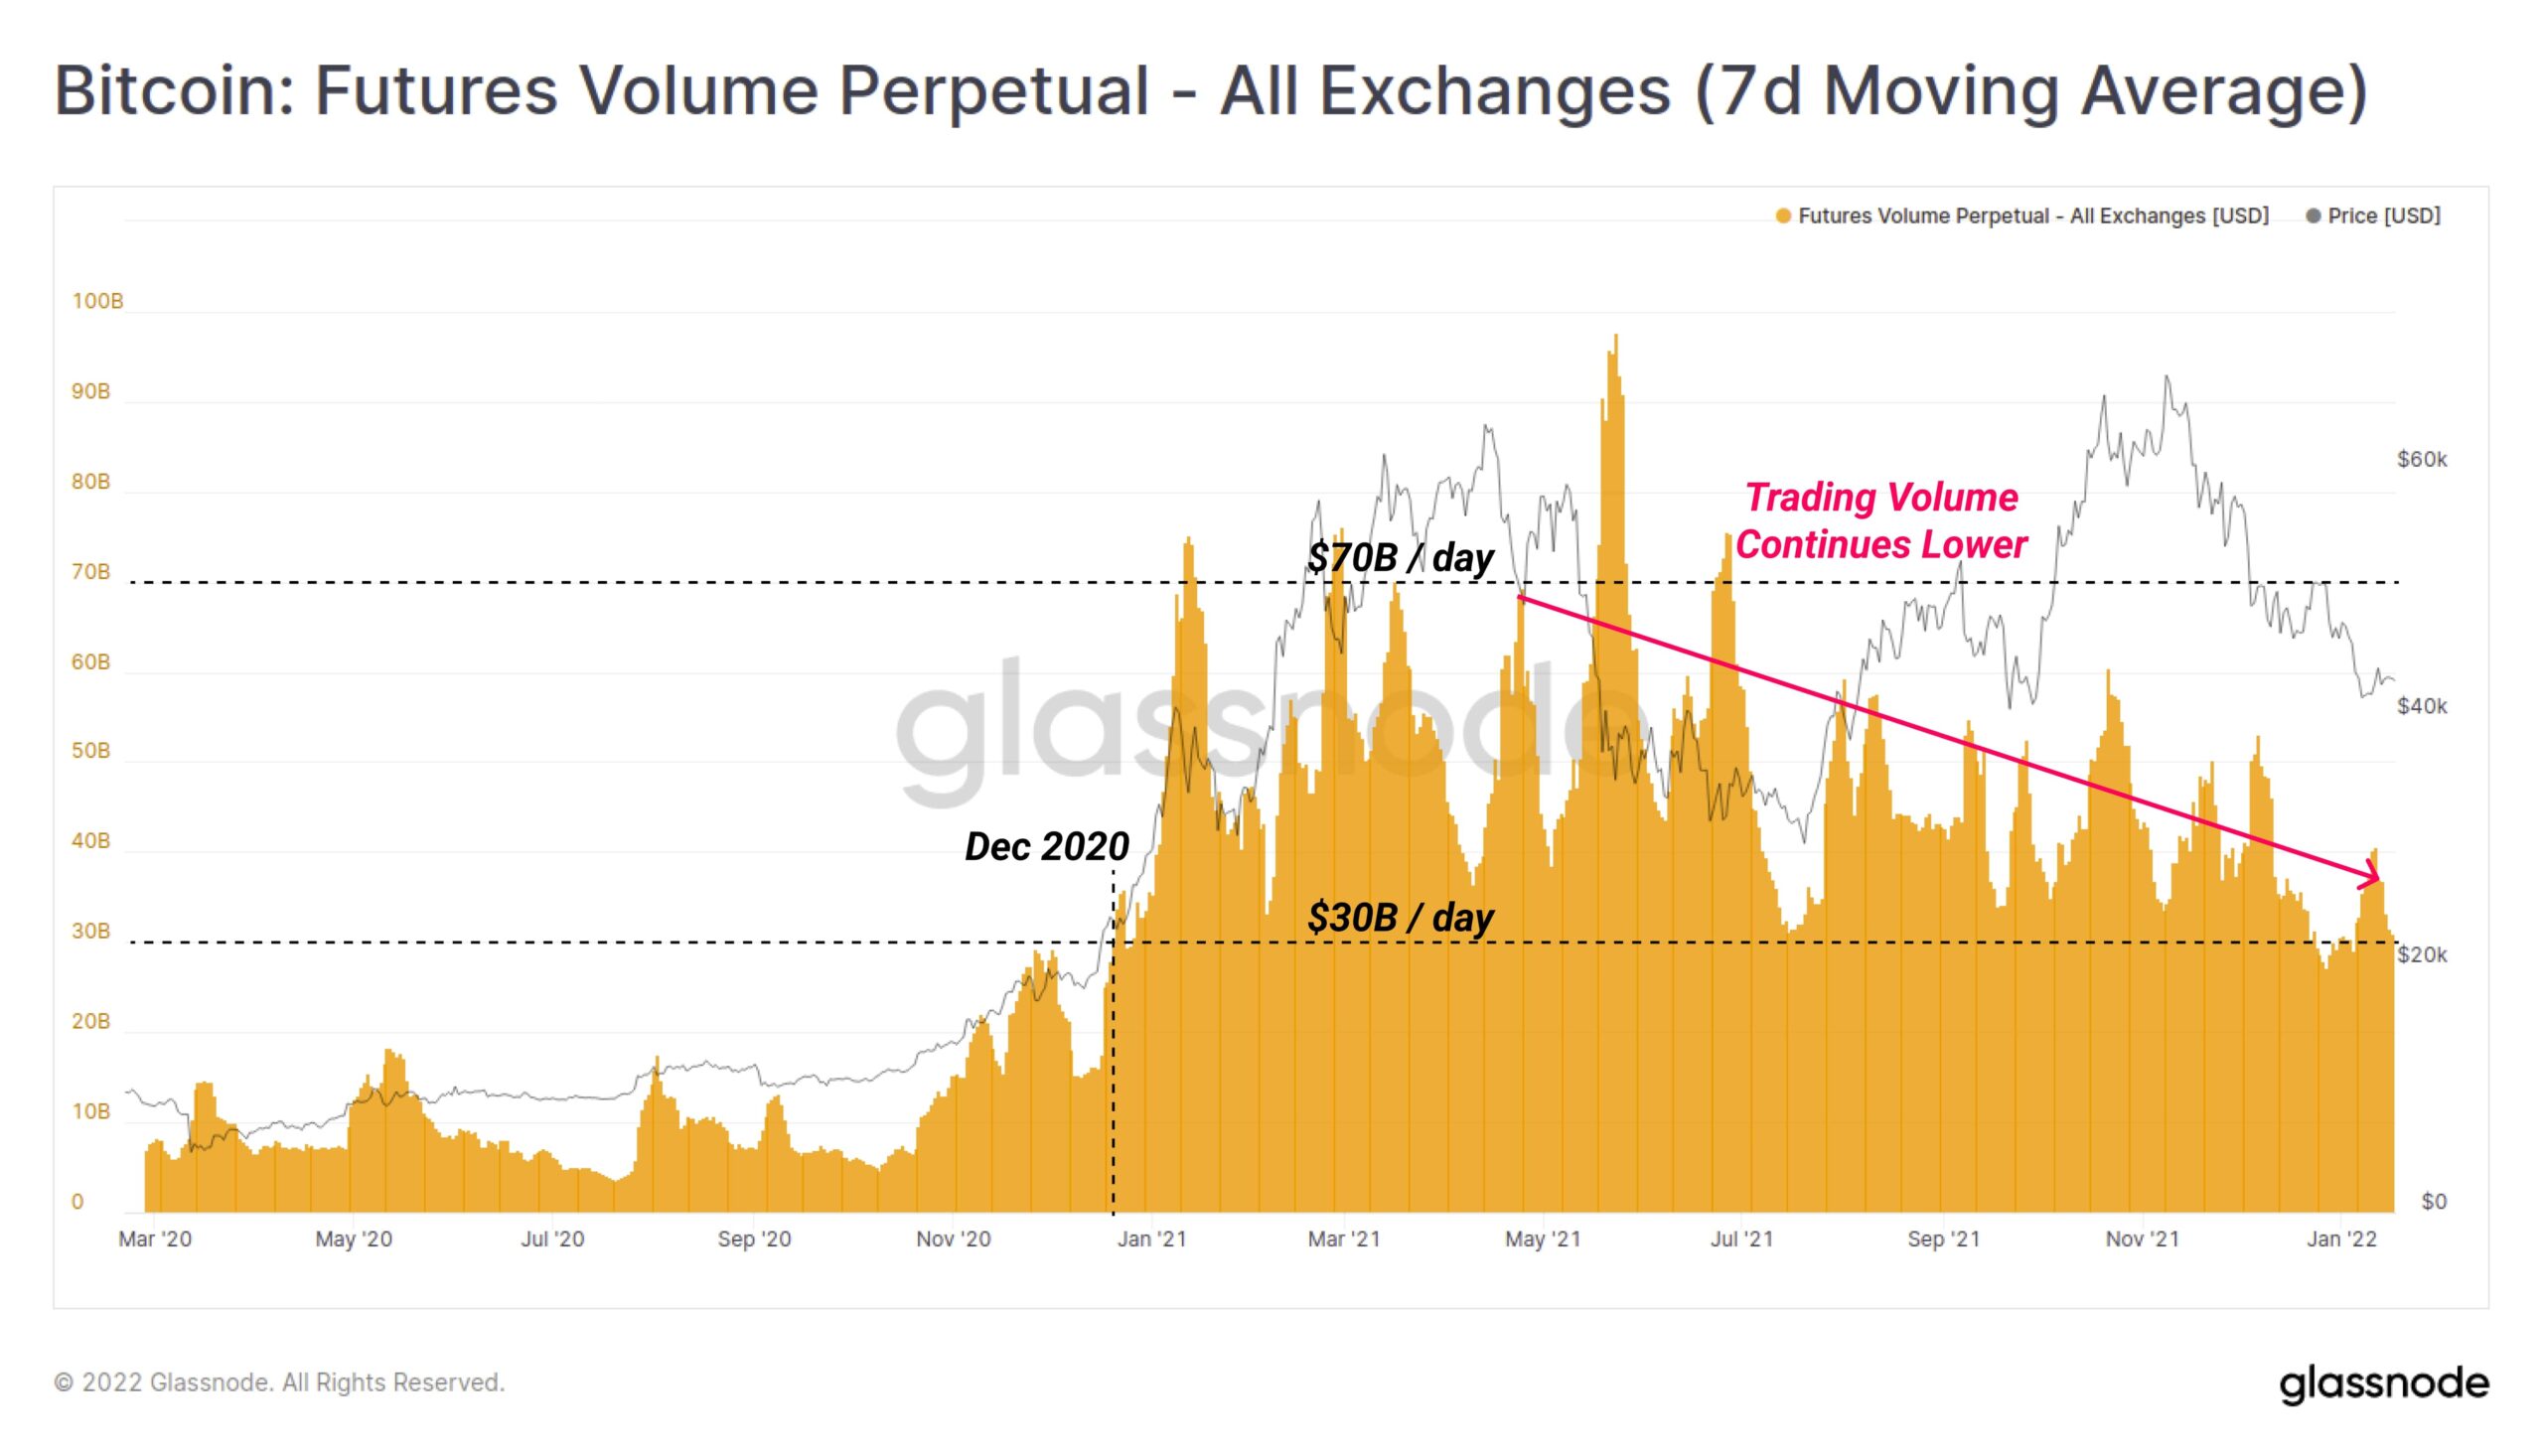 Bitcoin: Futures Volume Perpetual - All Exchanges (7d Moving Average)